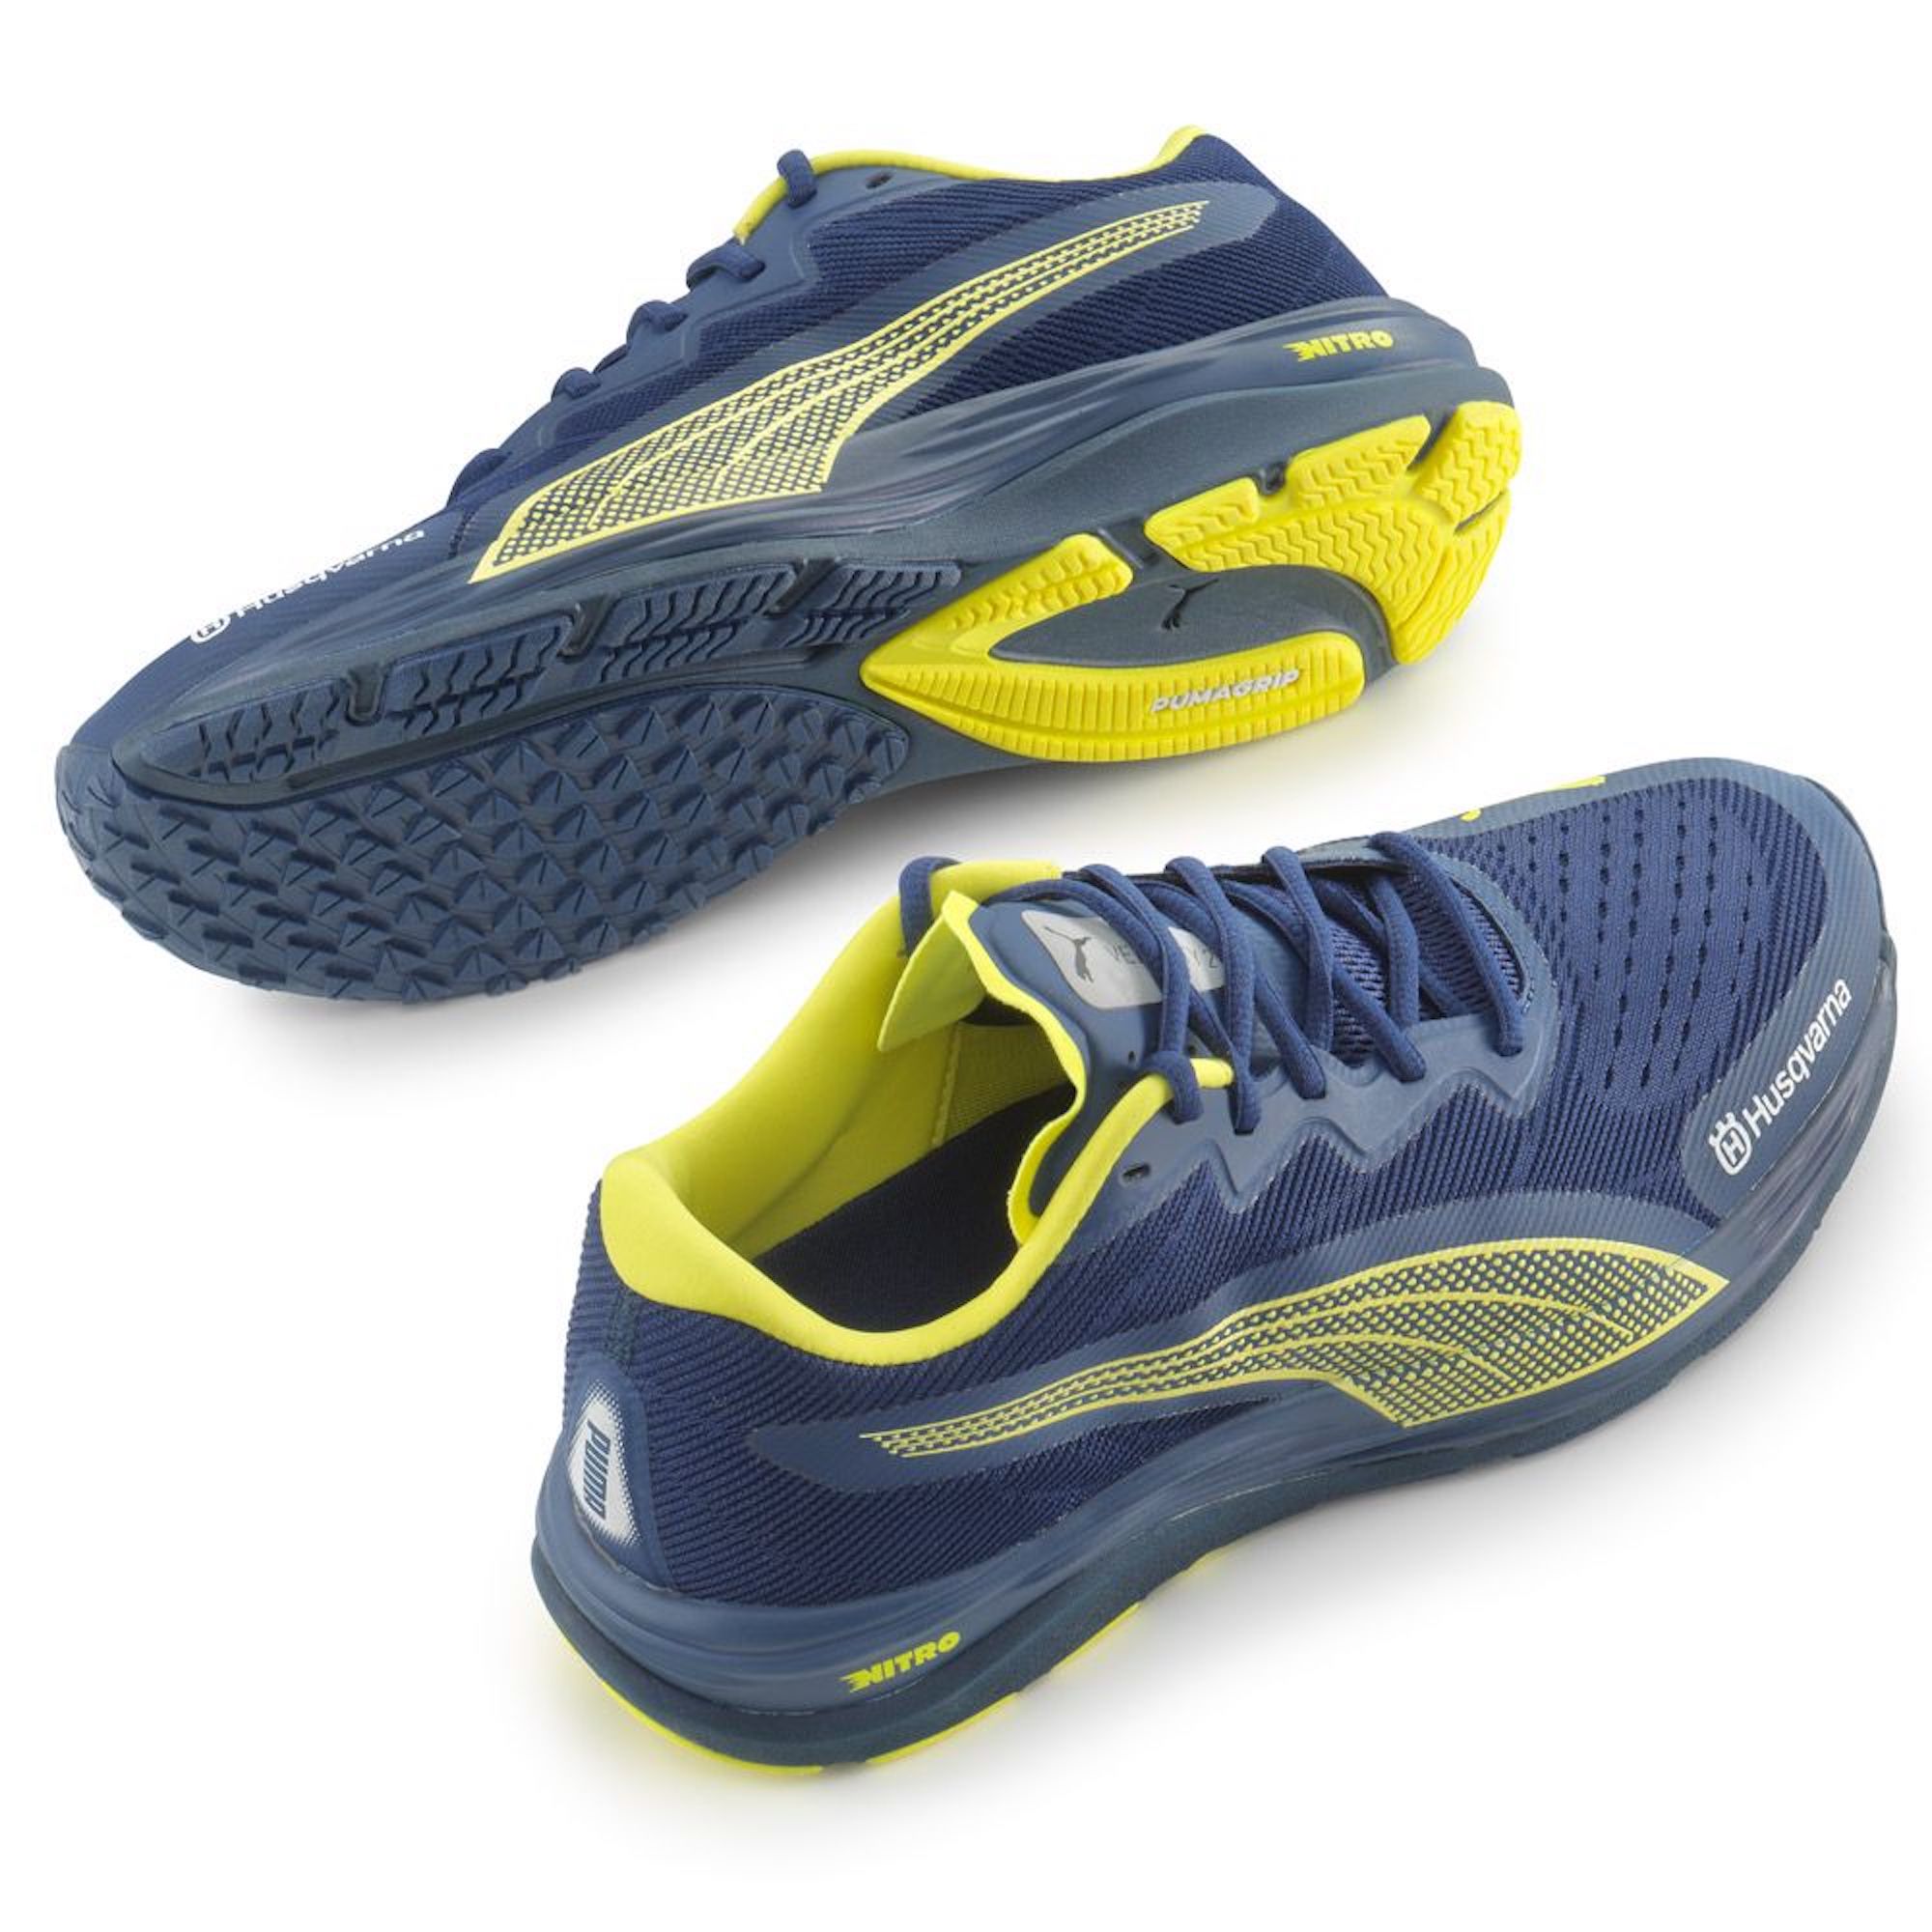 A view of the PUMA Nitro 2 running shoes, currently carrying a Husqvarna scheme. Available at select participating dealerships. Media sourced from Husqvarna.